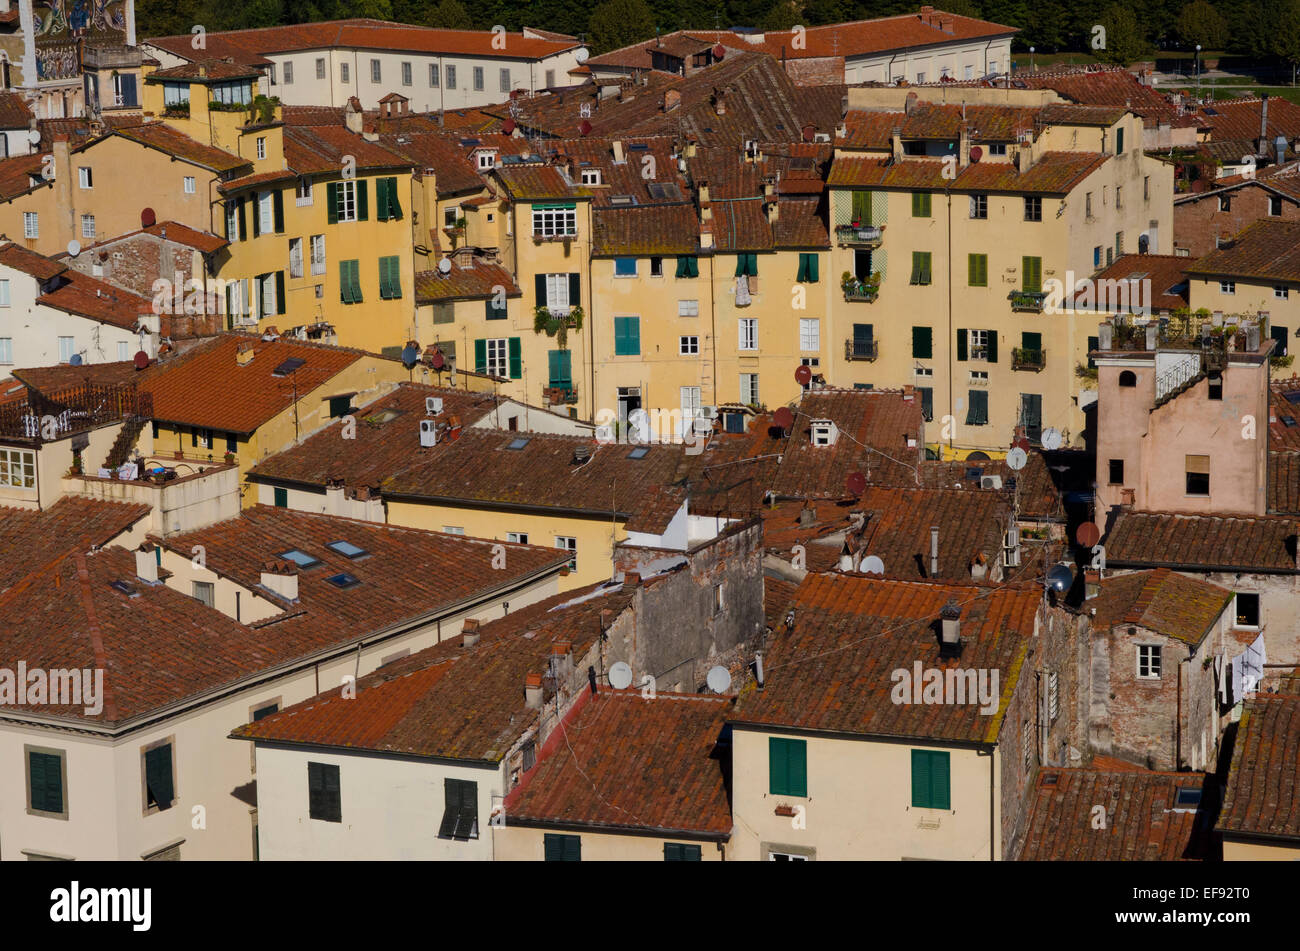 View from the top of the Guinigi tower showing the Roman Amphiteater in Lucca, Tuscany, Italy Stock Photo